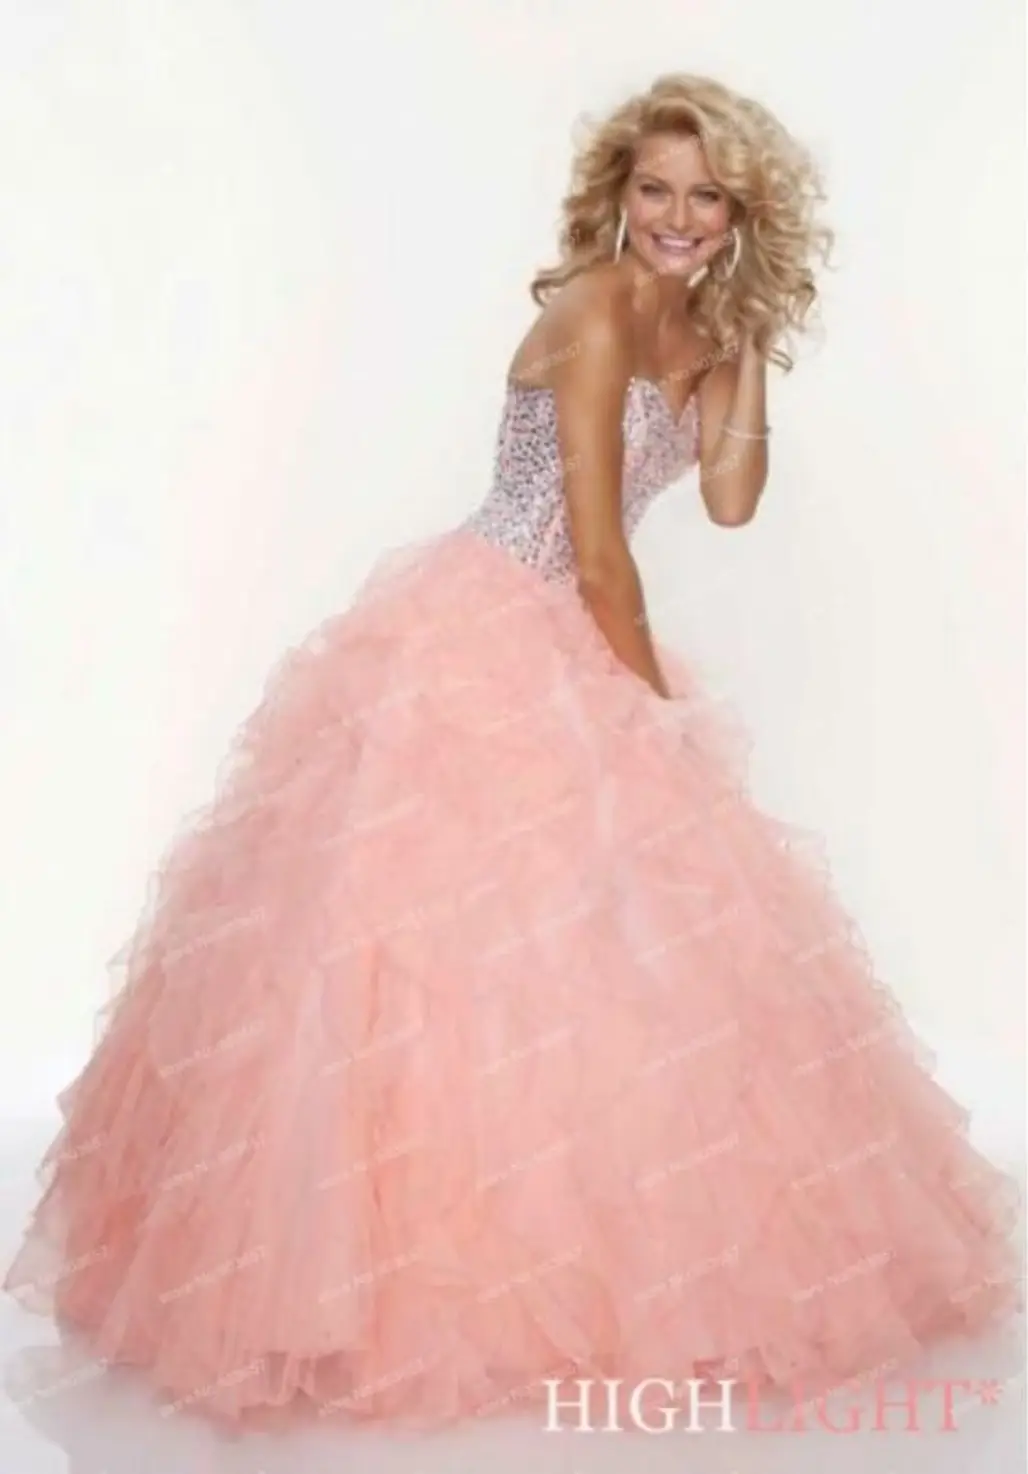 wedding dress,dress,clothing,gown,pink,